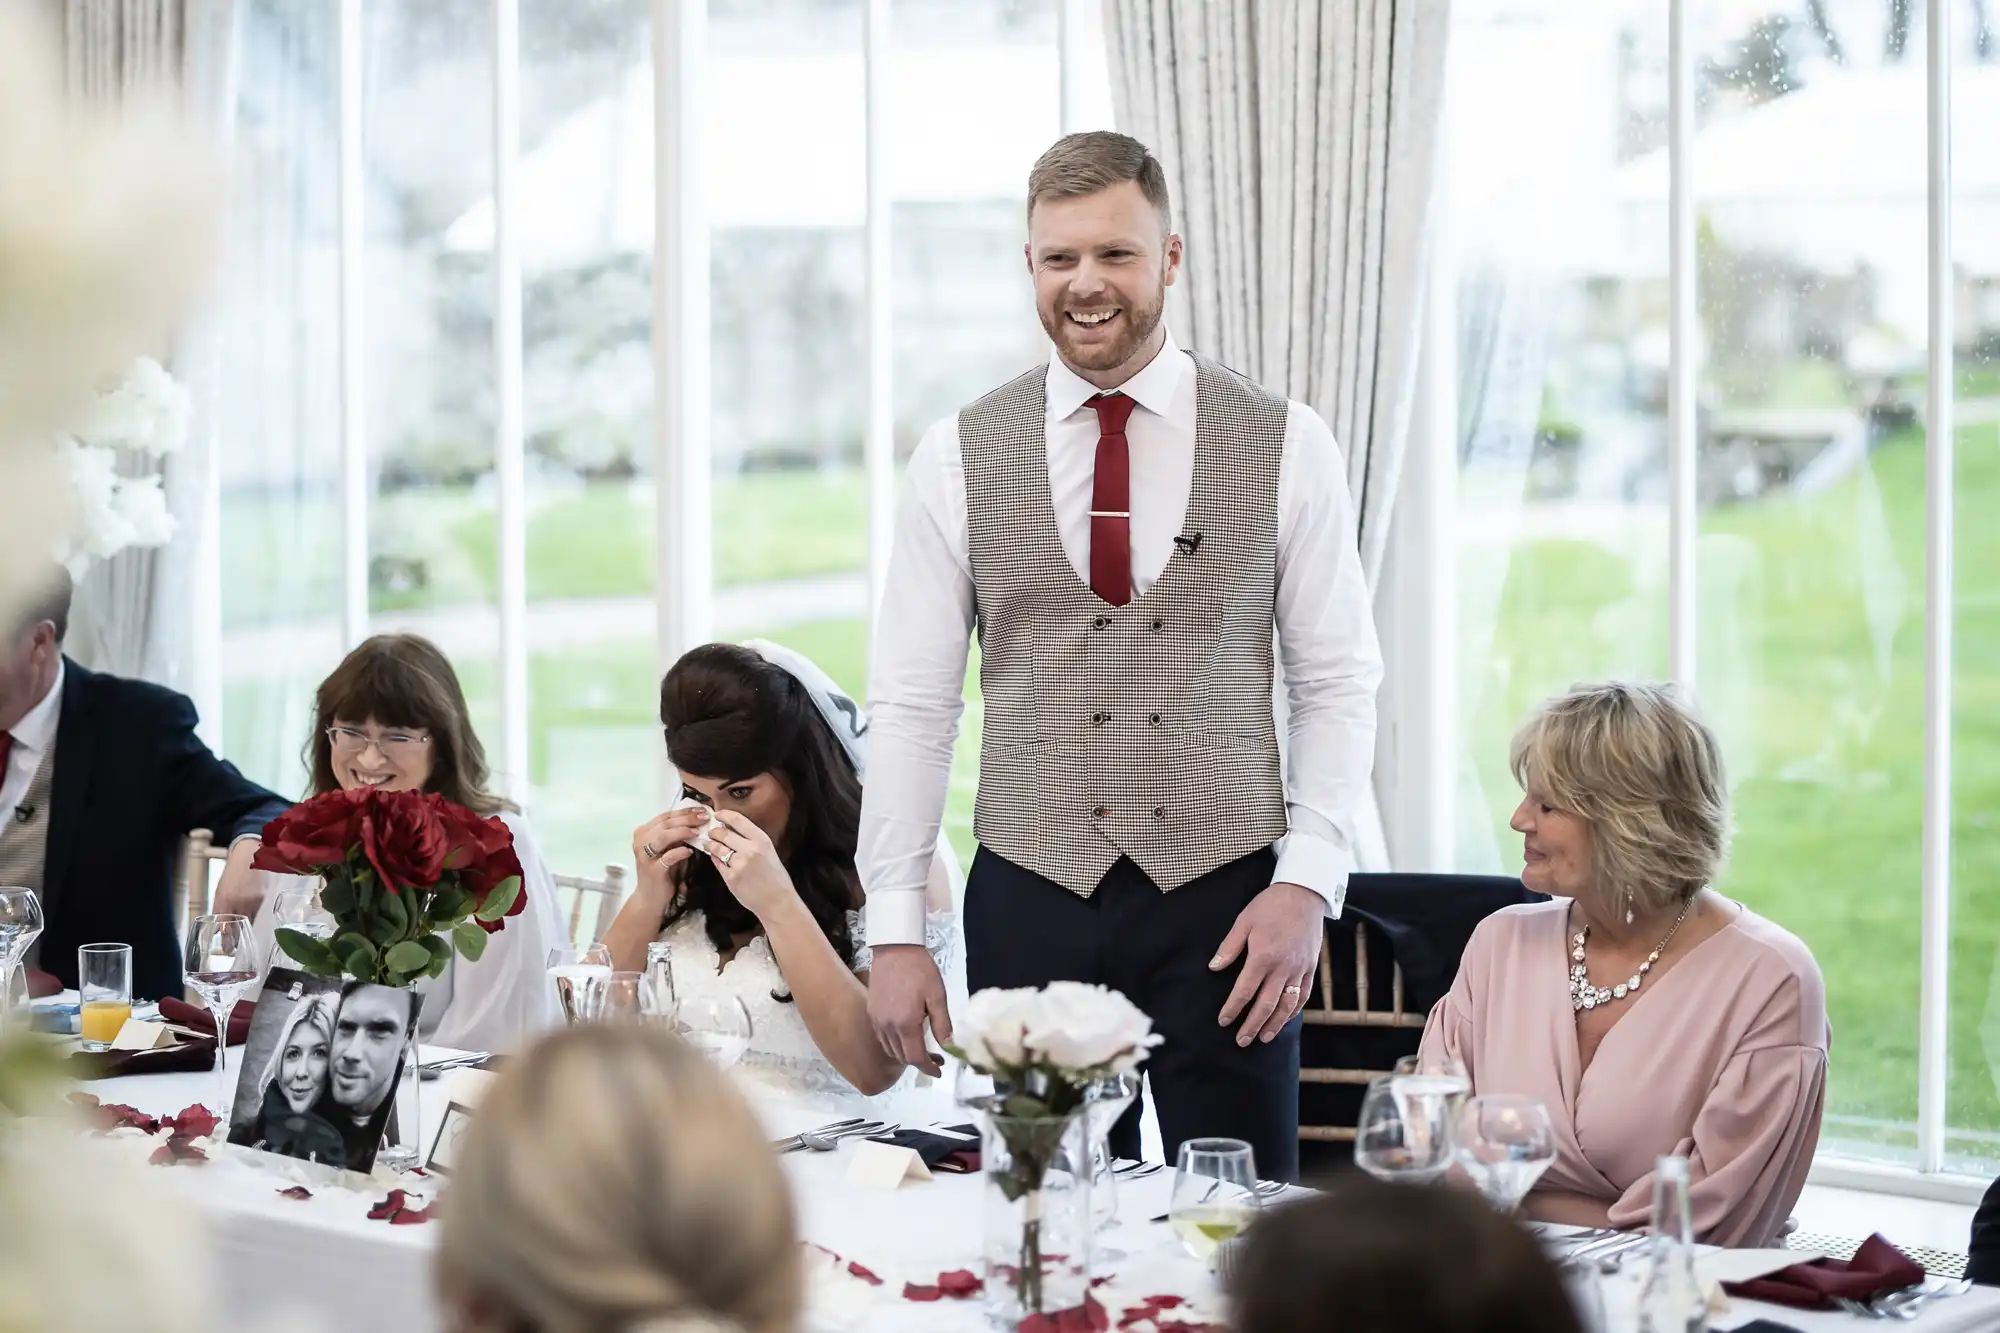 A man in a vest gives a speech while a seated woman in a white dress wipes her eyes. They are at a reception with several guests seated around a table decorated with flowers.